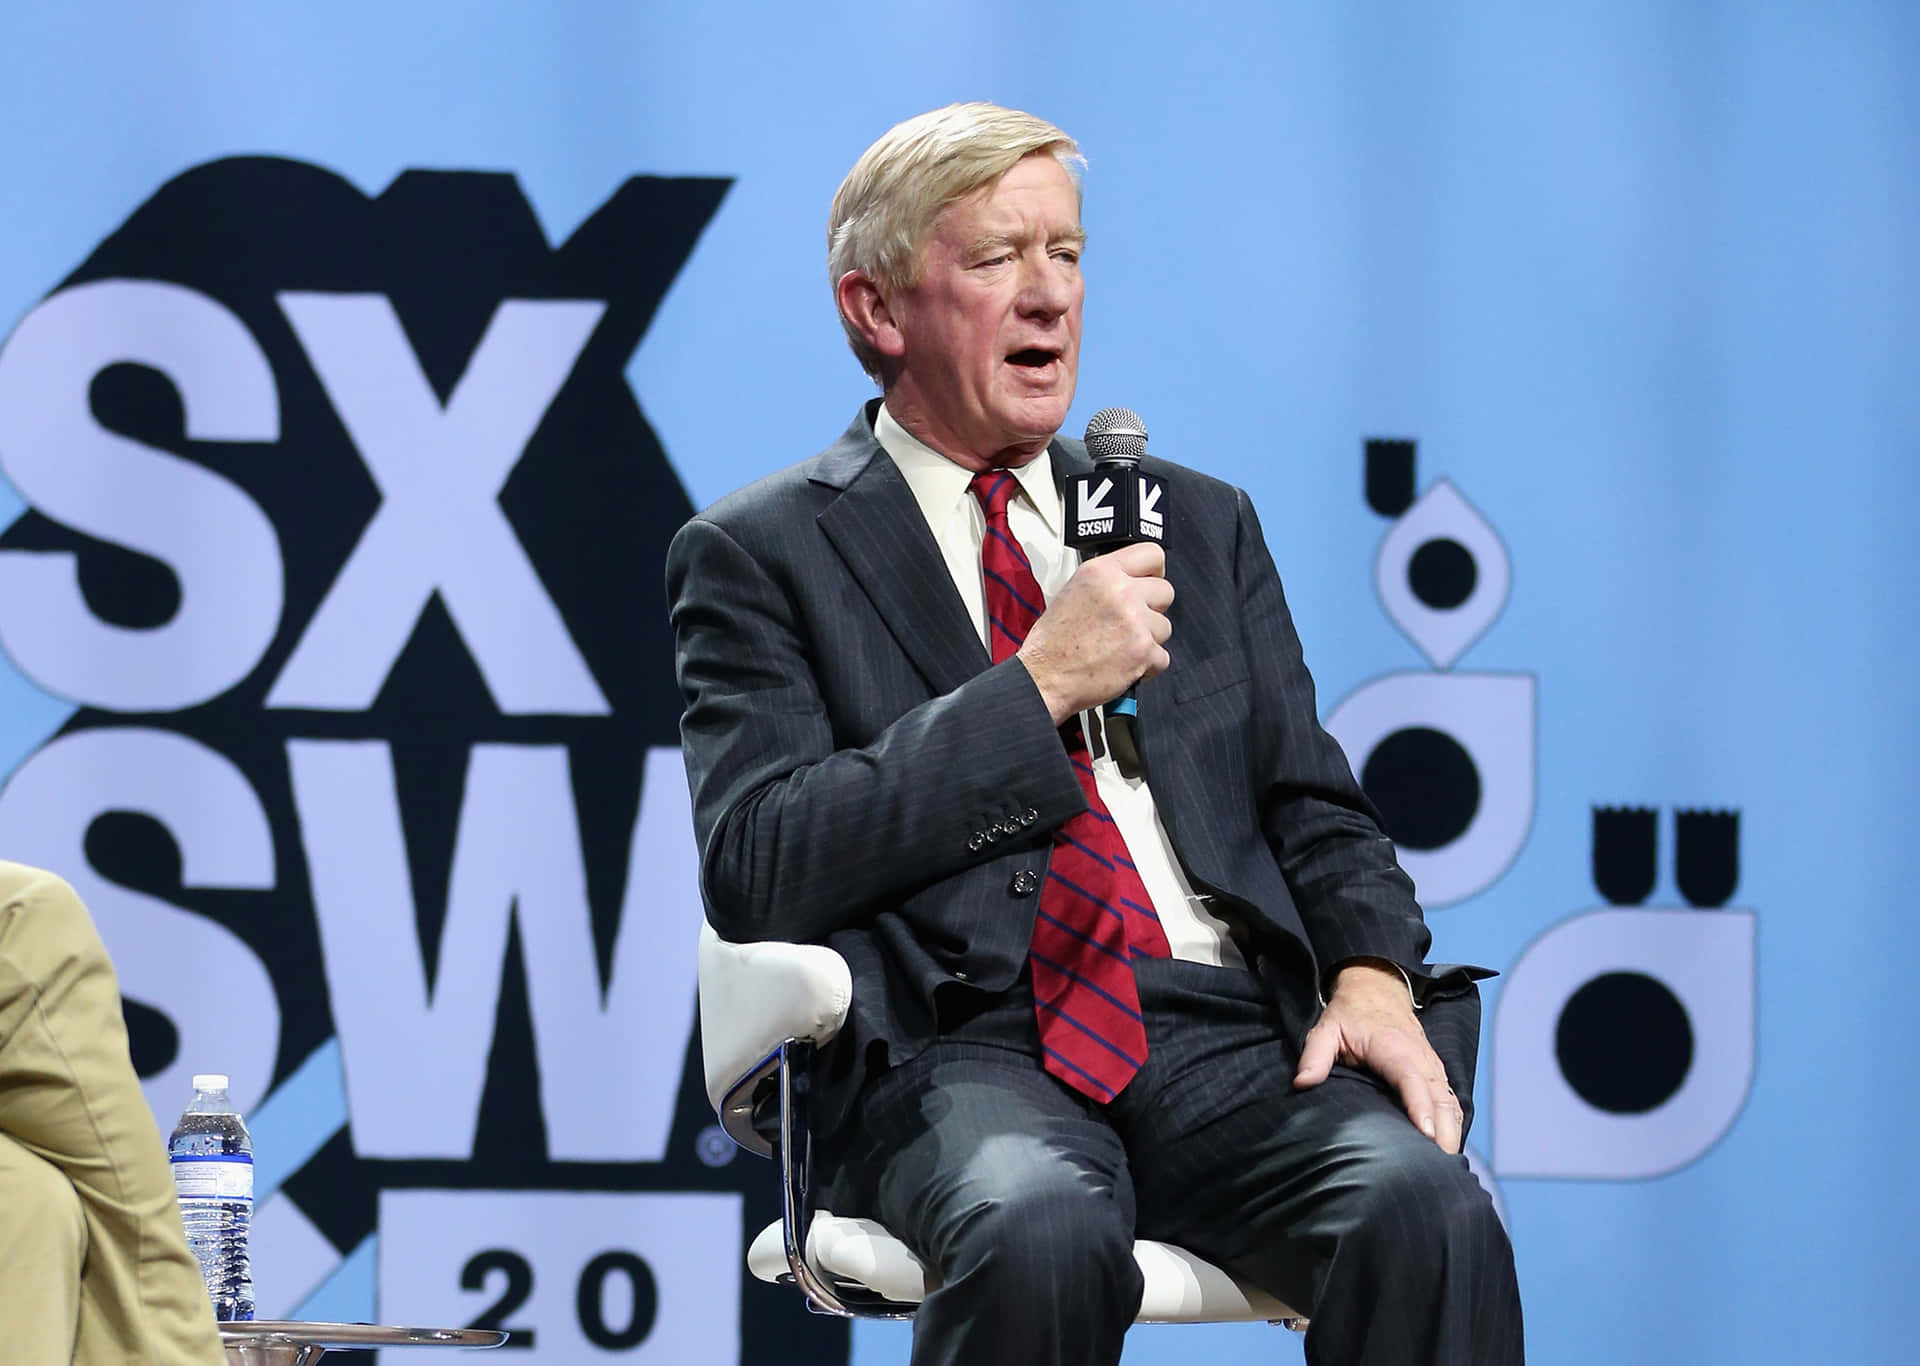 Speech Of William Weld For The People Wallpaper